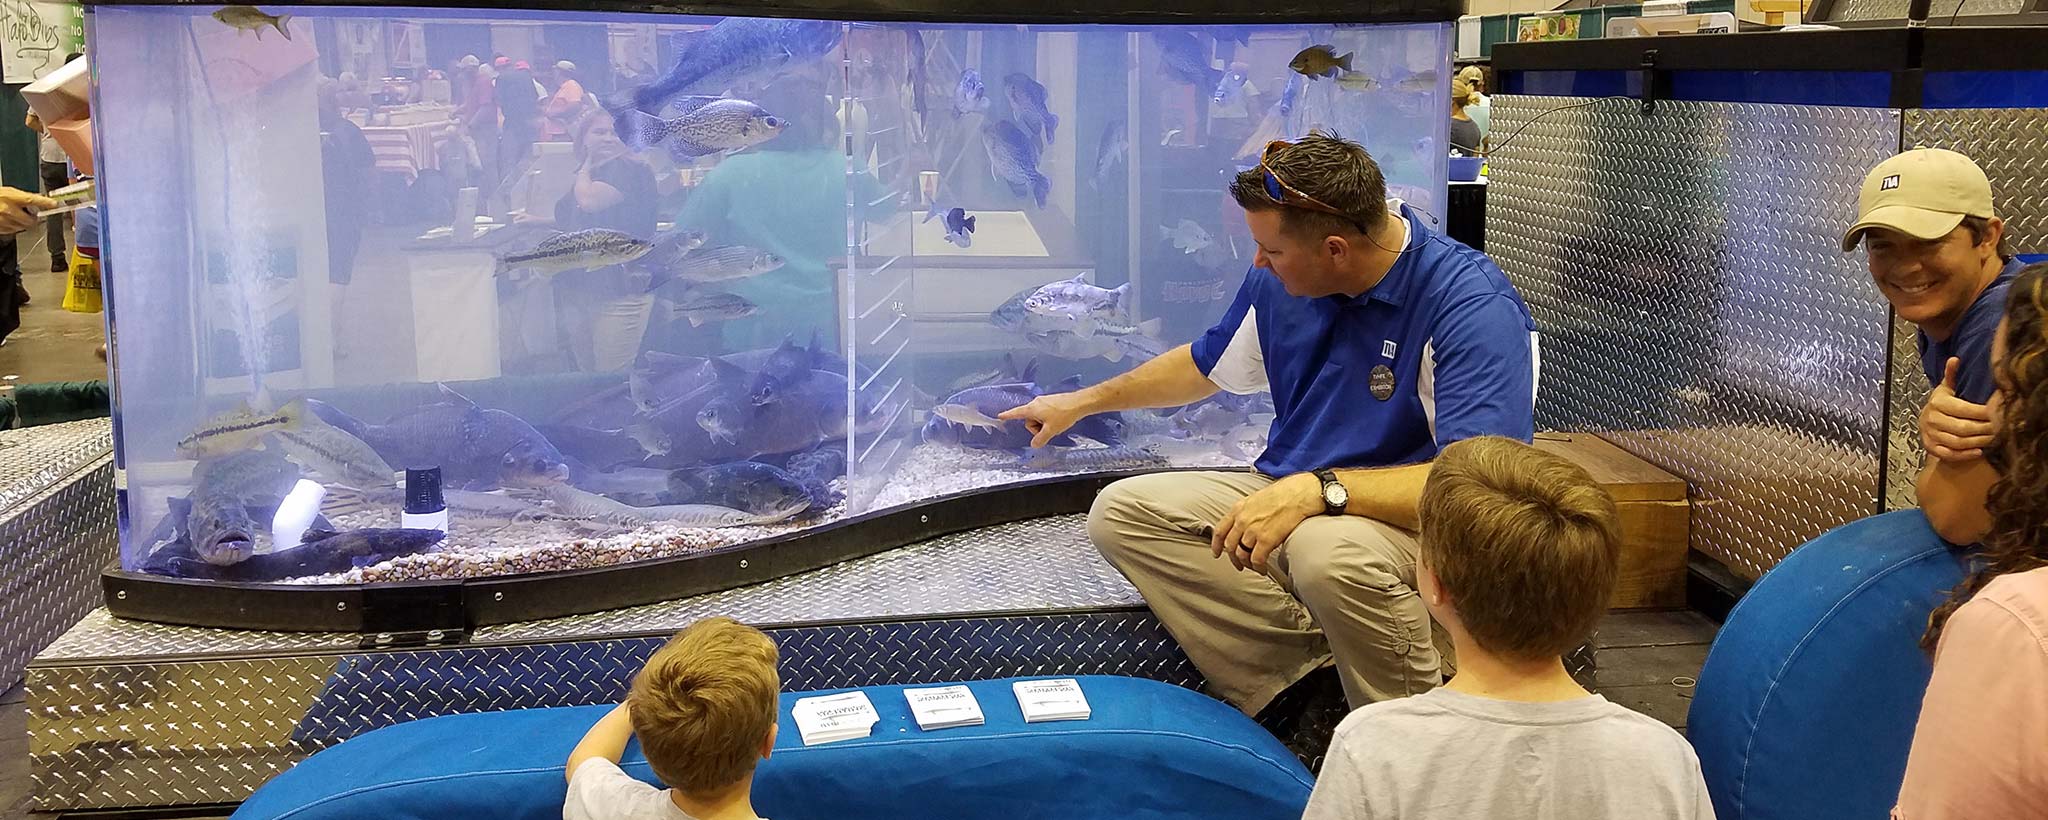 TVA biologist showing the mobile aquarium at an event